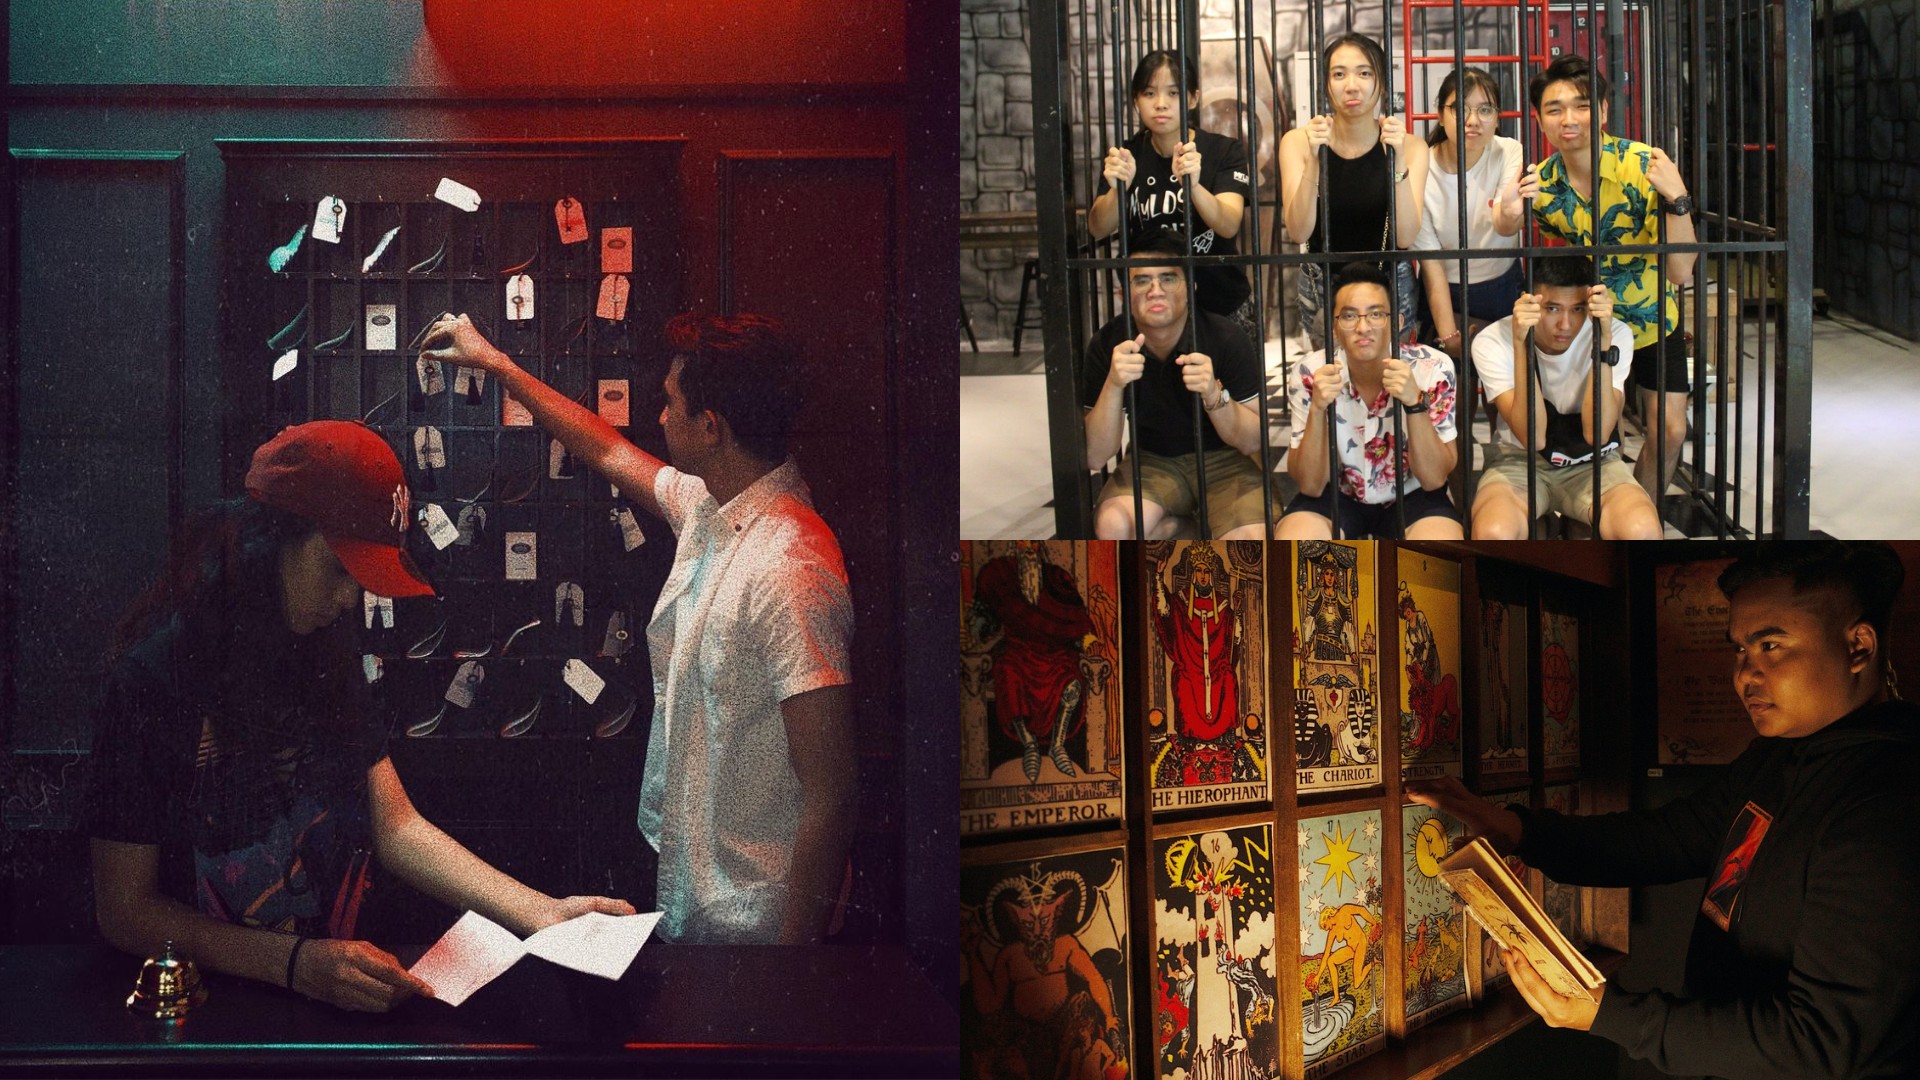 6 Best Escape Room Games In KL & PJ Challenge Yourself With This Fun